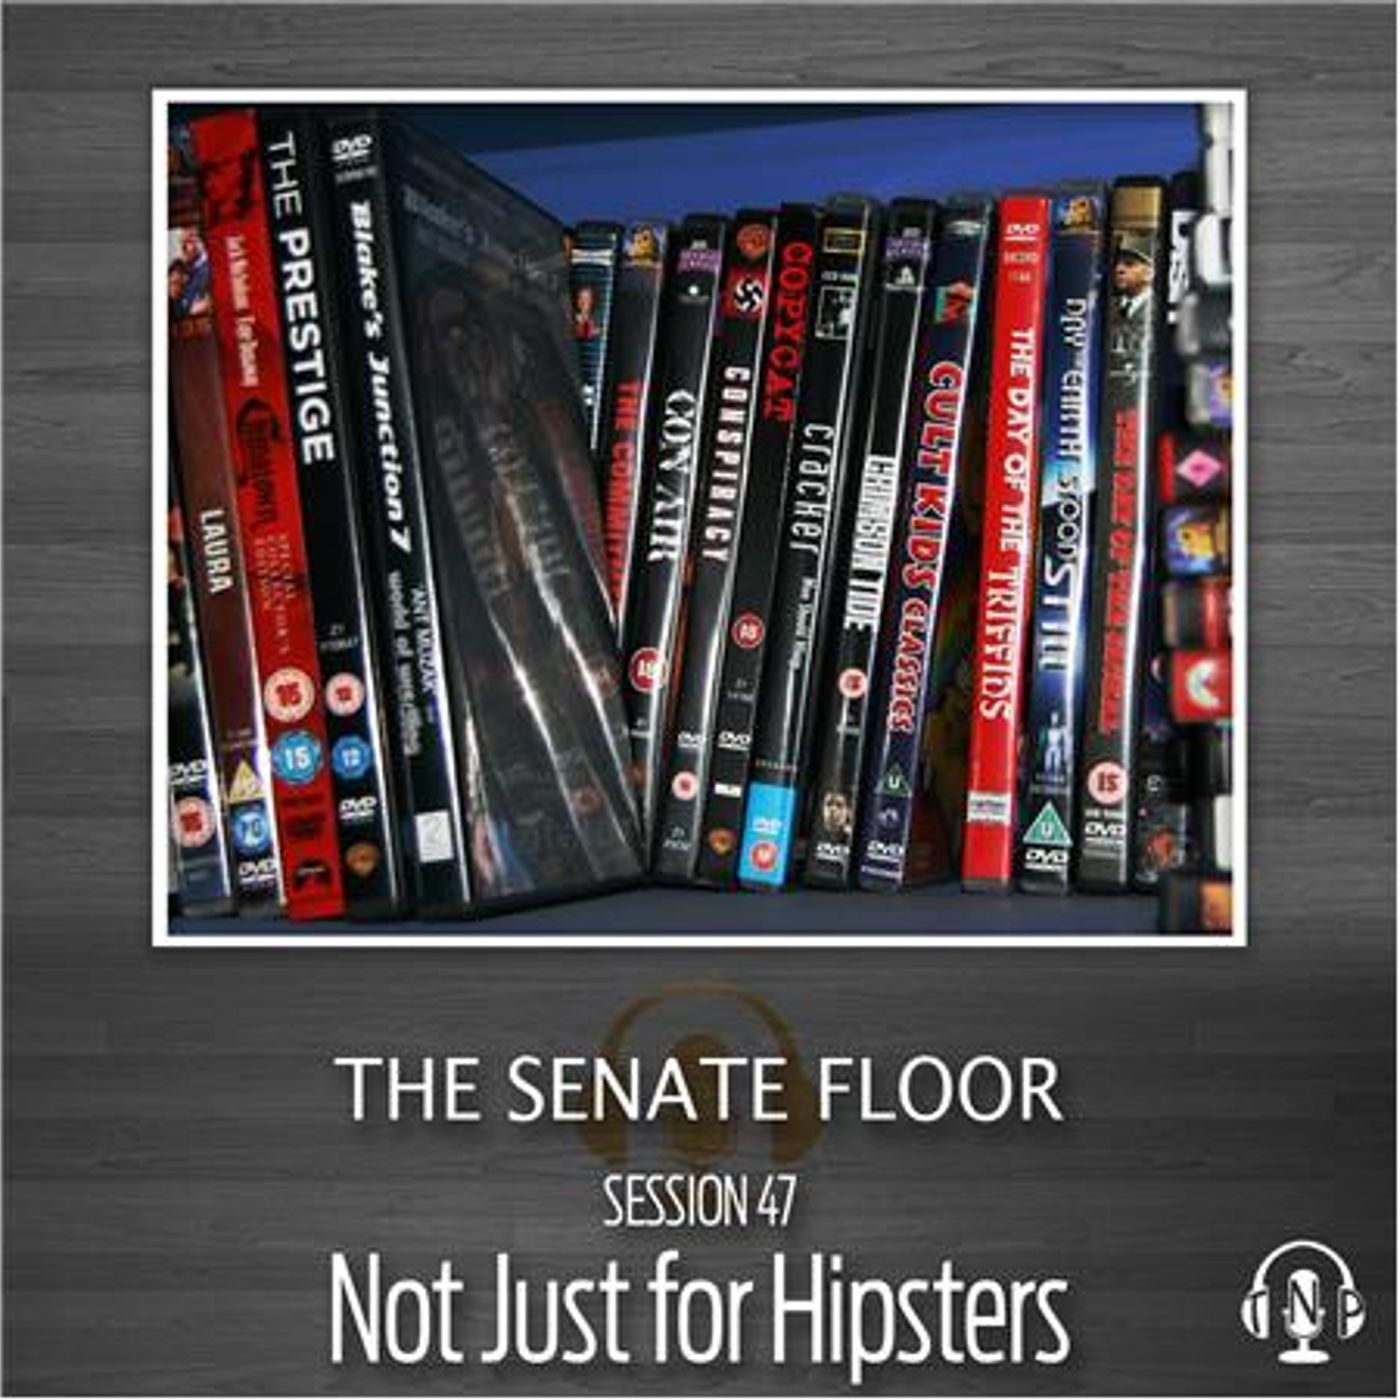 Session 47 - Not Just for Hipsters